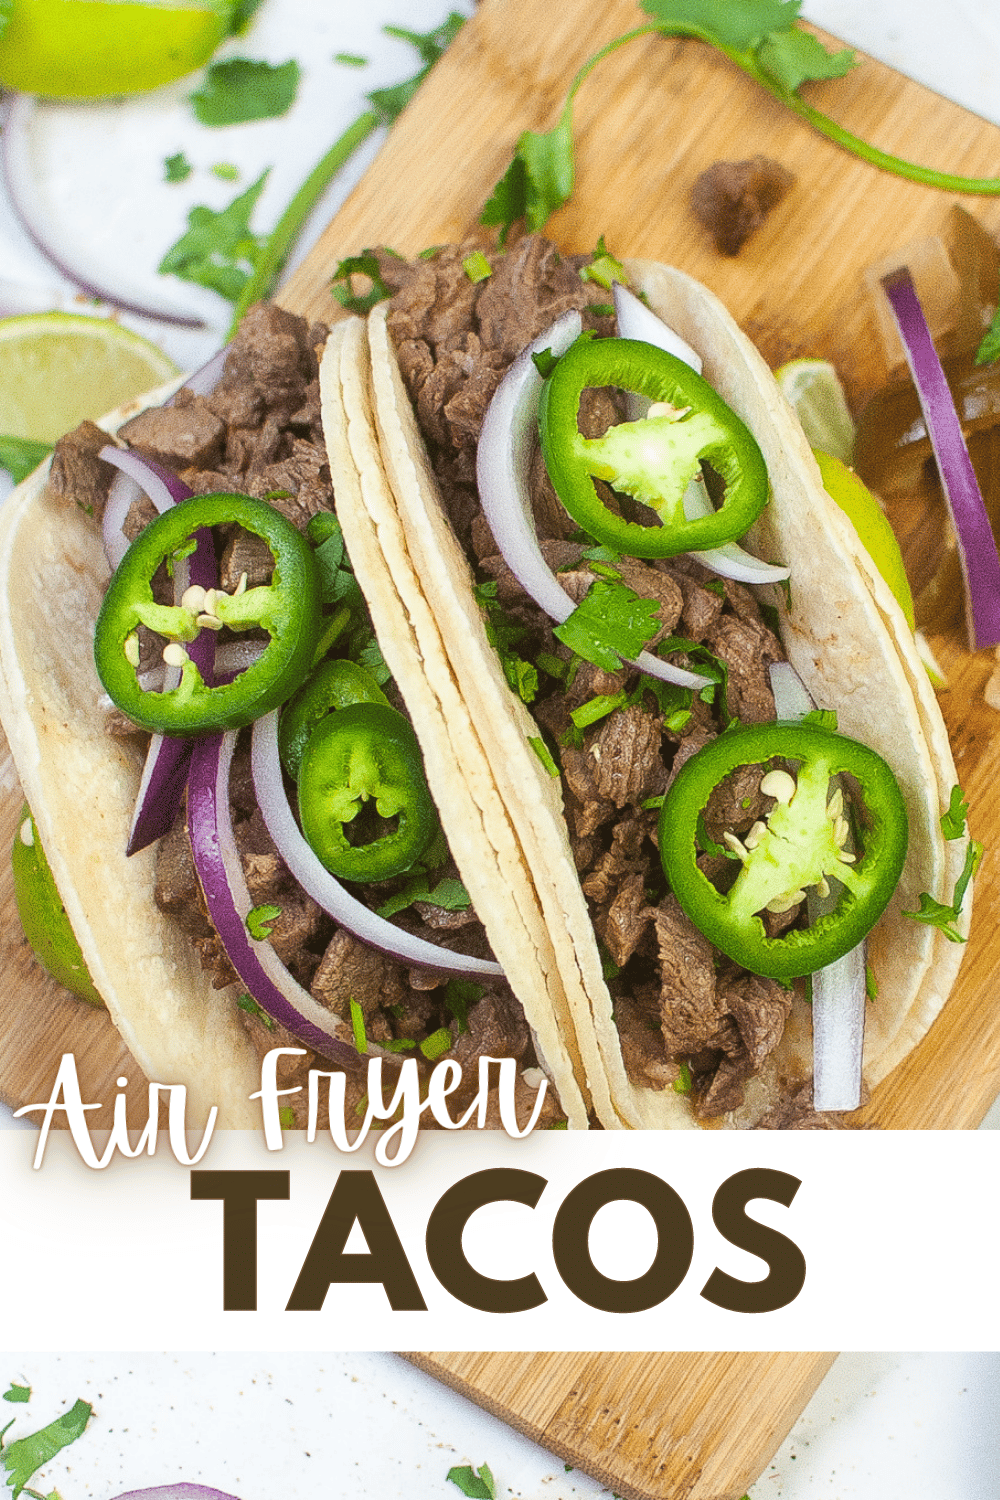 These Air Fryer Tacos are amazing. The beef is so juicy and flavorful, and the shells get nice and soft. This is a must-try recipe! #airfryertacos #steakstreettacos #tacosinairfryer #streetsteaktacos via @wondermomwannab